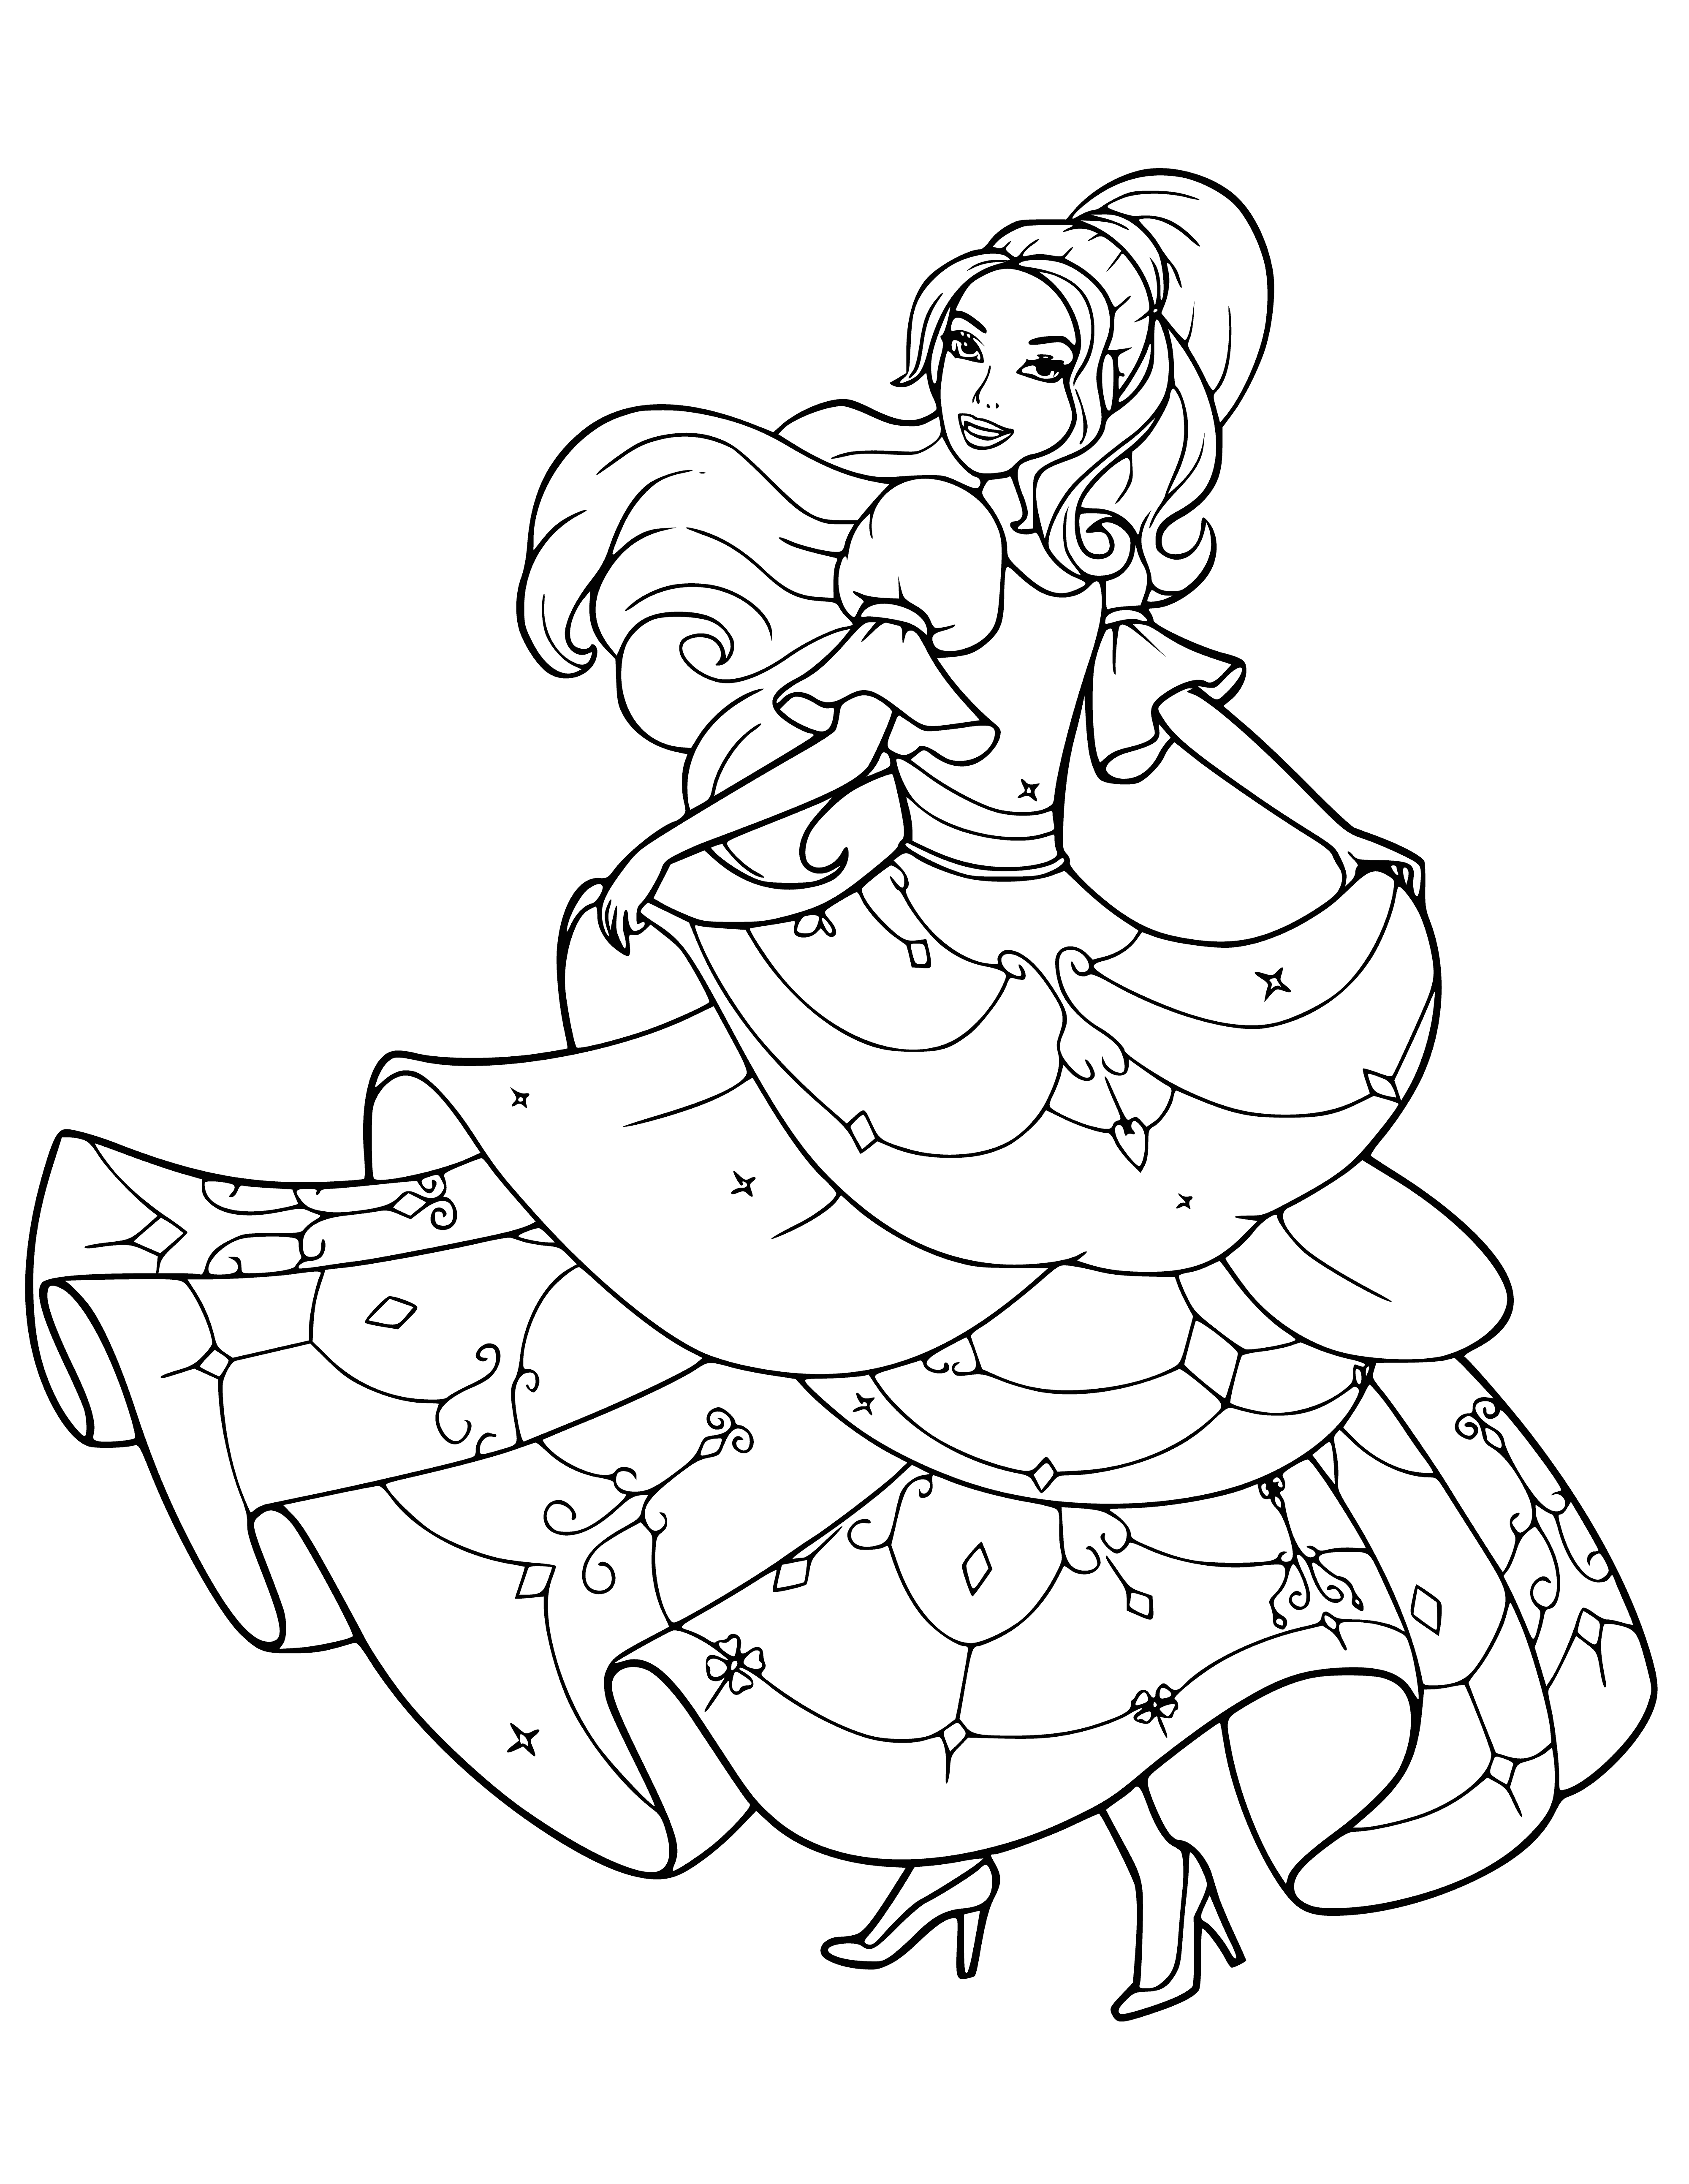 coloring page: Barbie dances in a pink dress with black belt, shoes, blonde hair and blue eyes. #Barbie